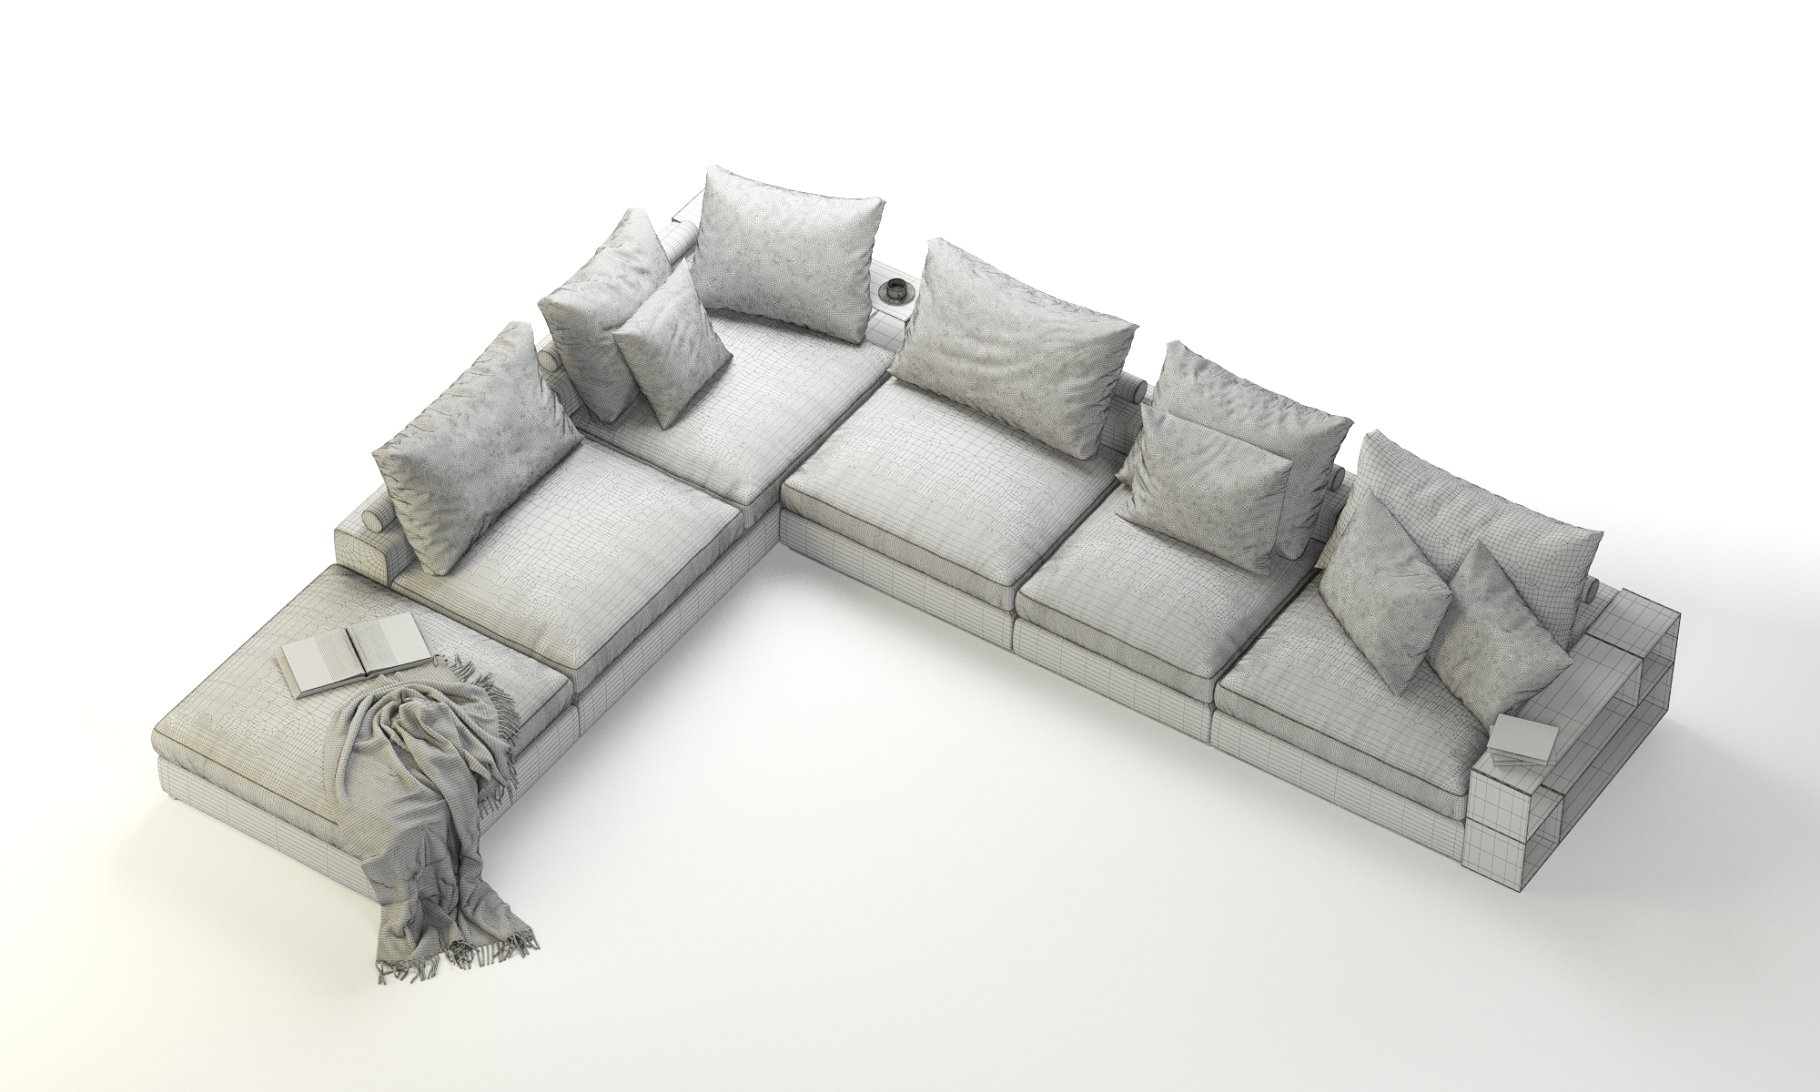 Images of an exquisite 3d model of a corner sectional sofa without textures